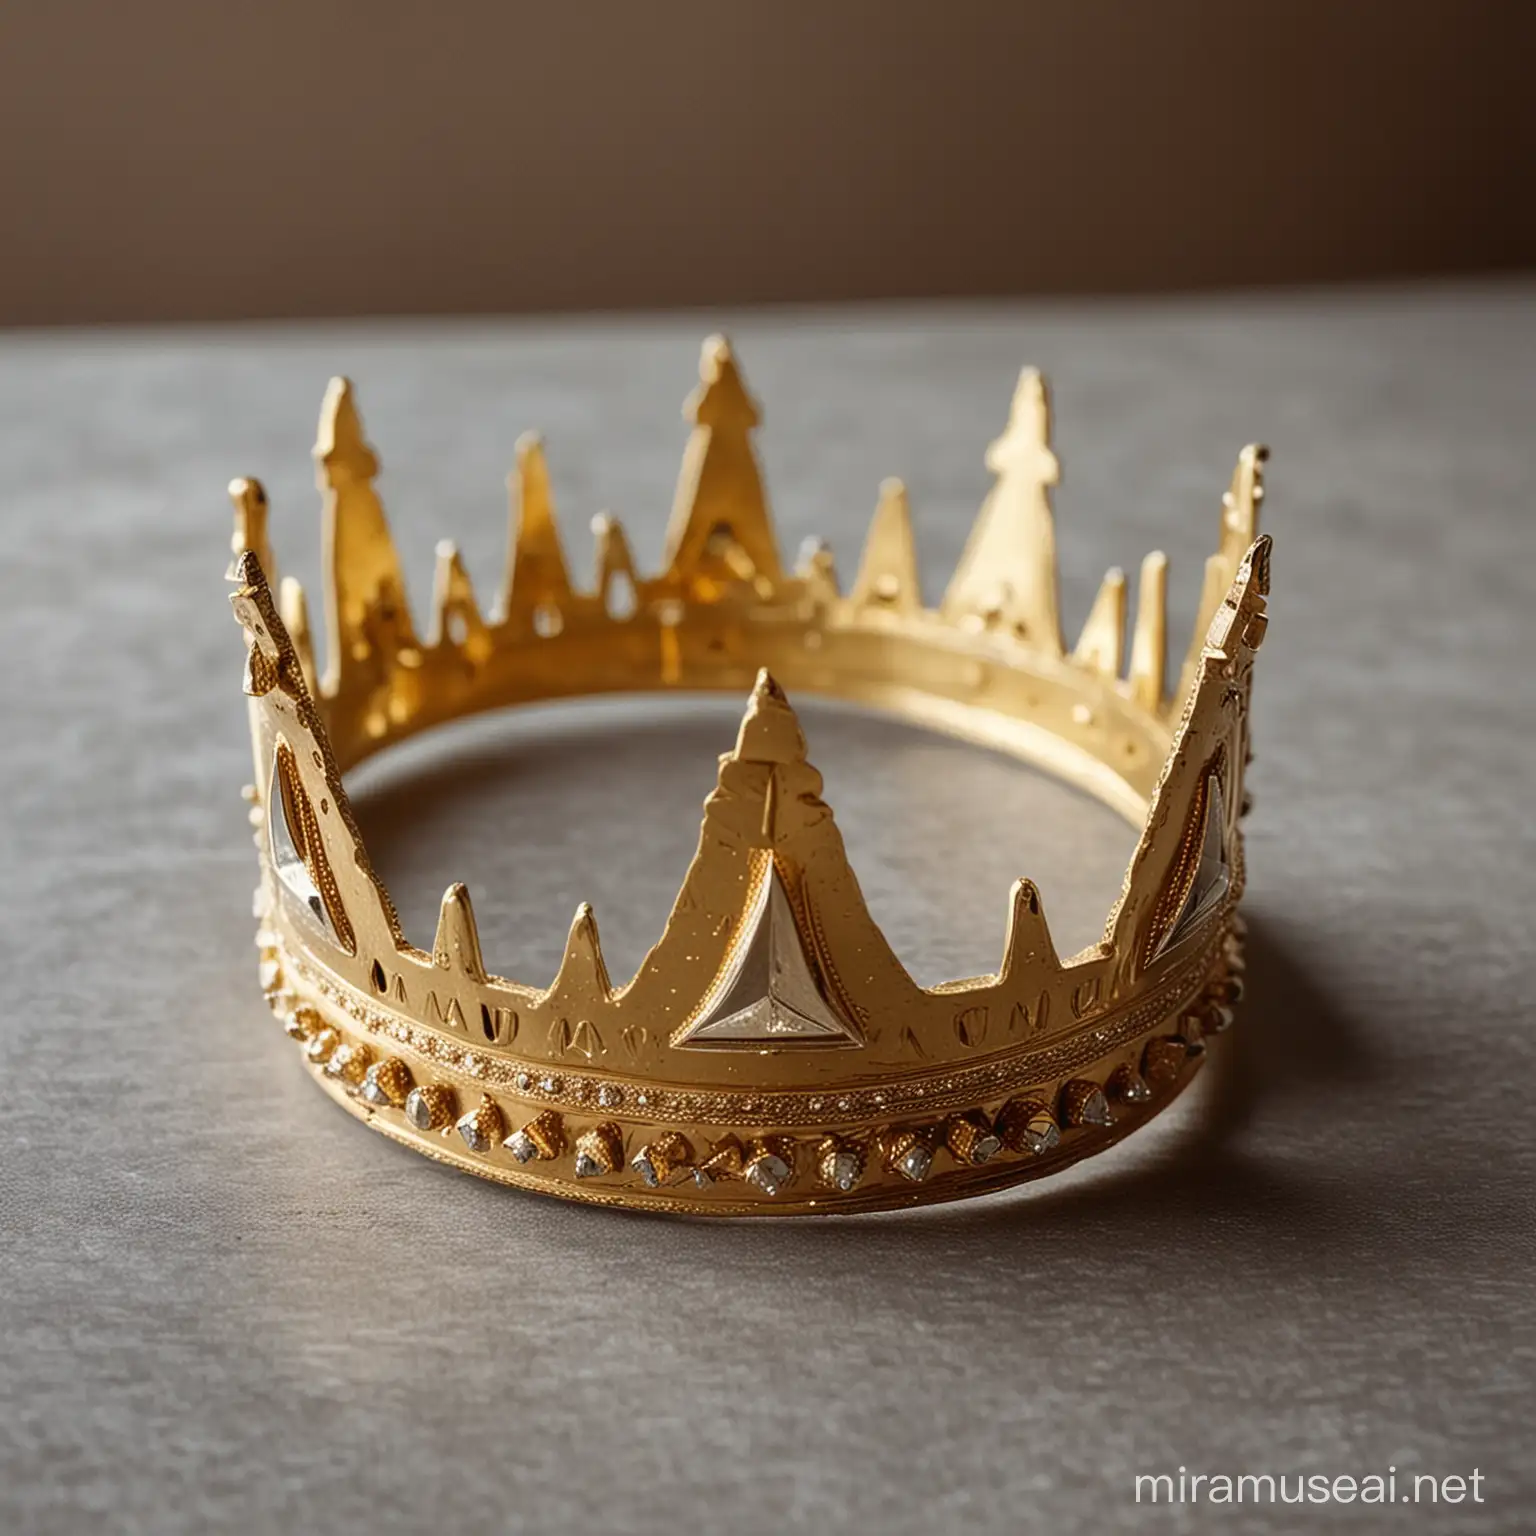 Exquisite Golden Crown with Triangular Flat Teeth on Table